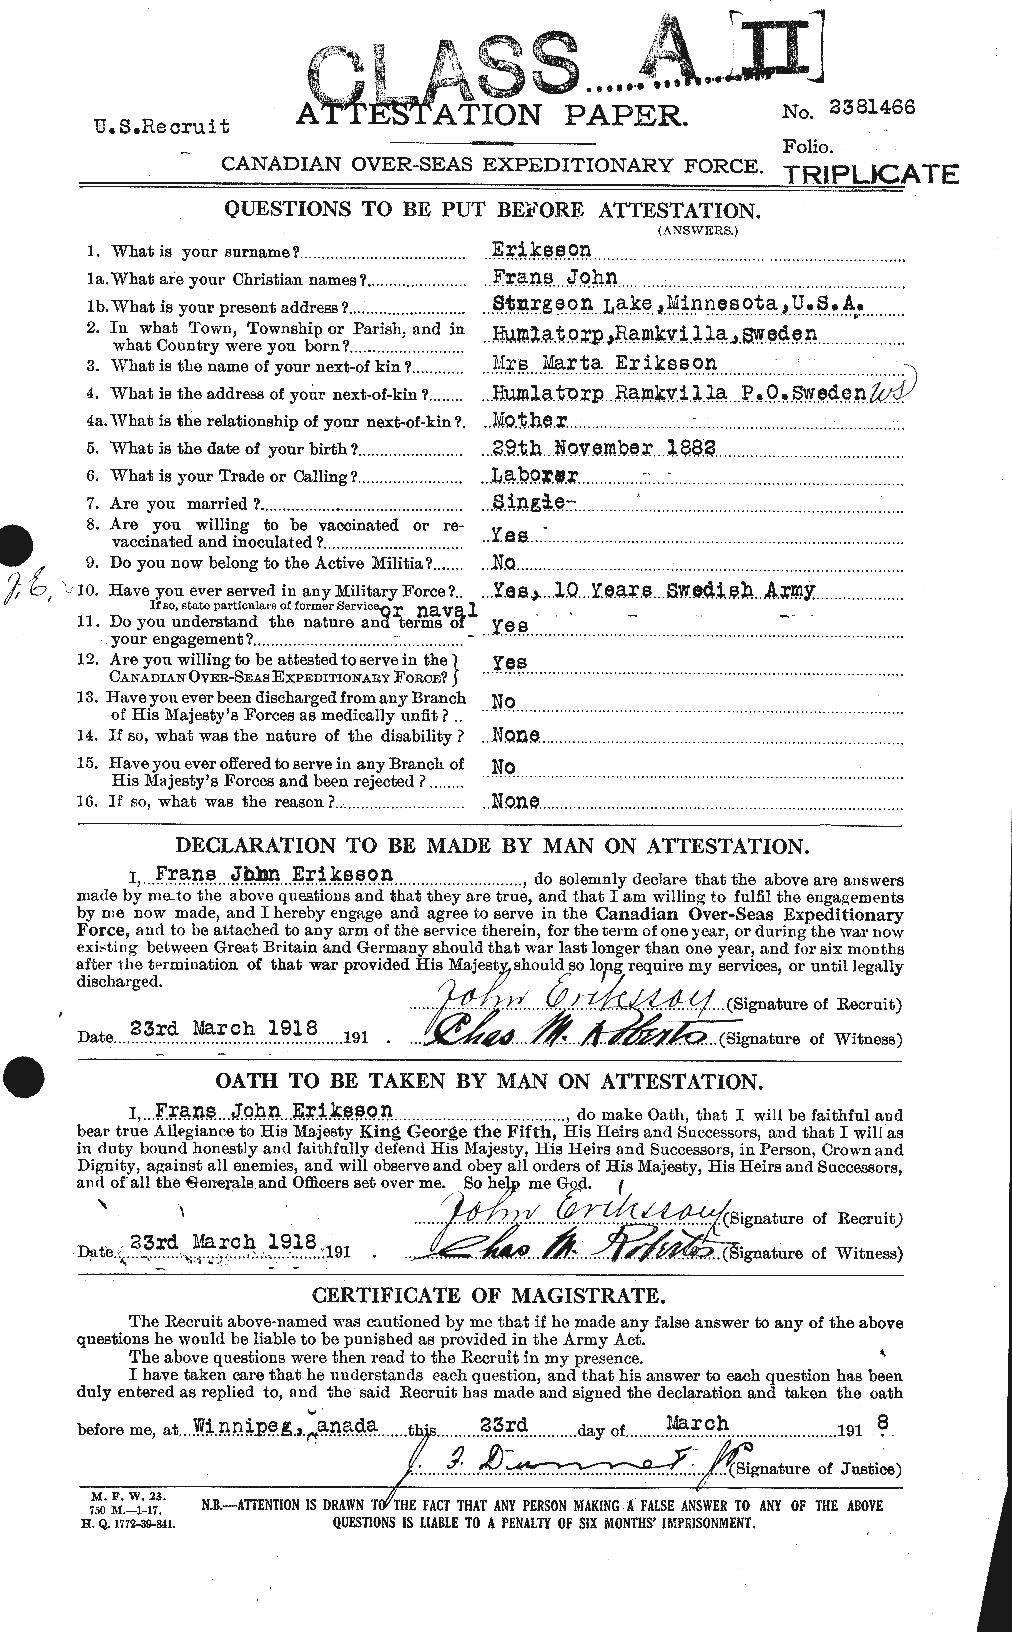 Personnel Records of the First World War - CEF 313467a